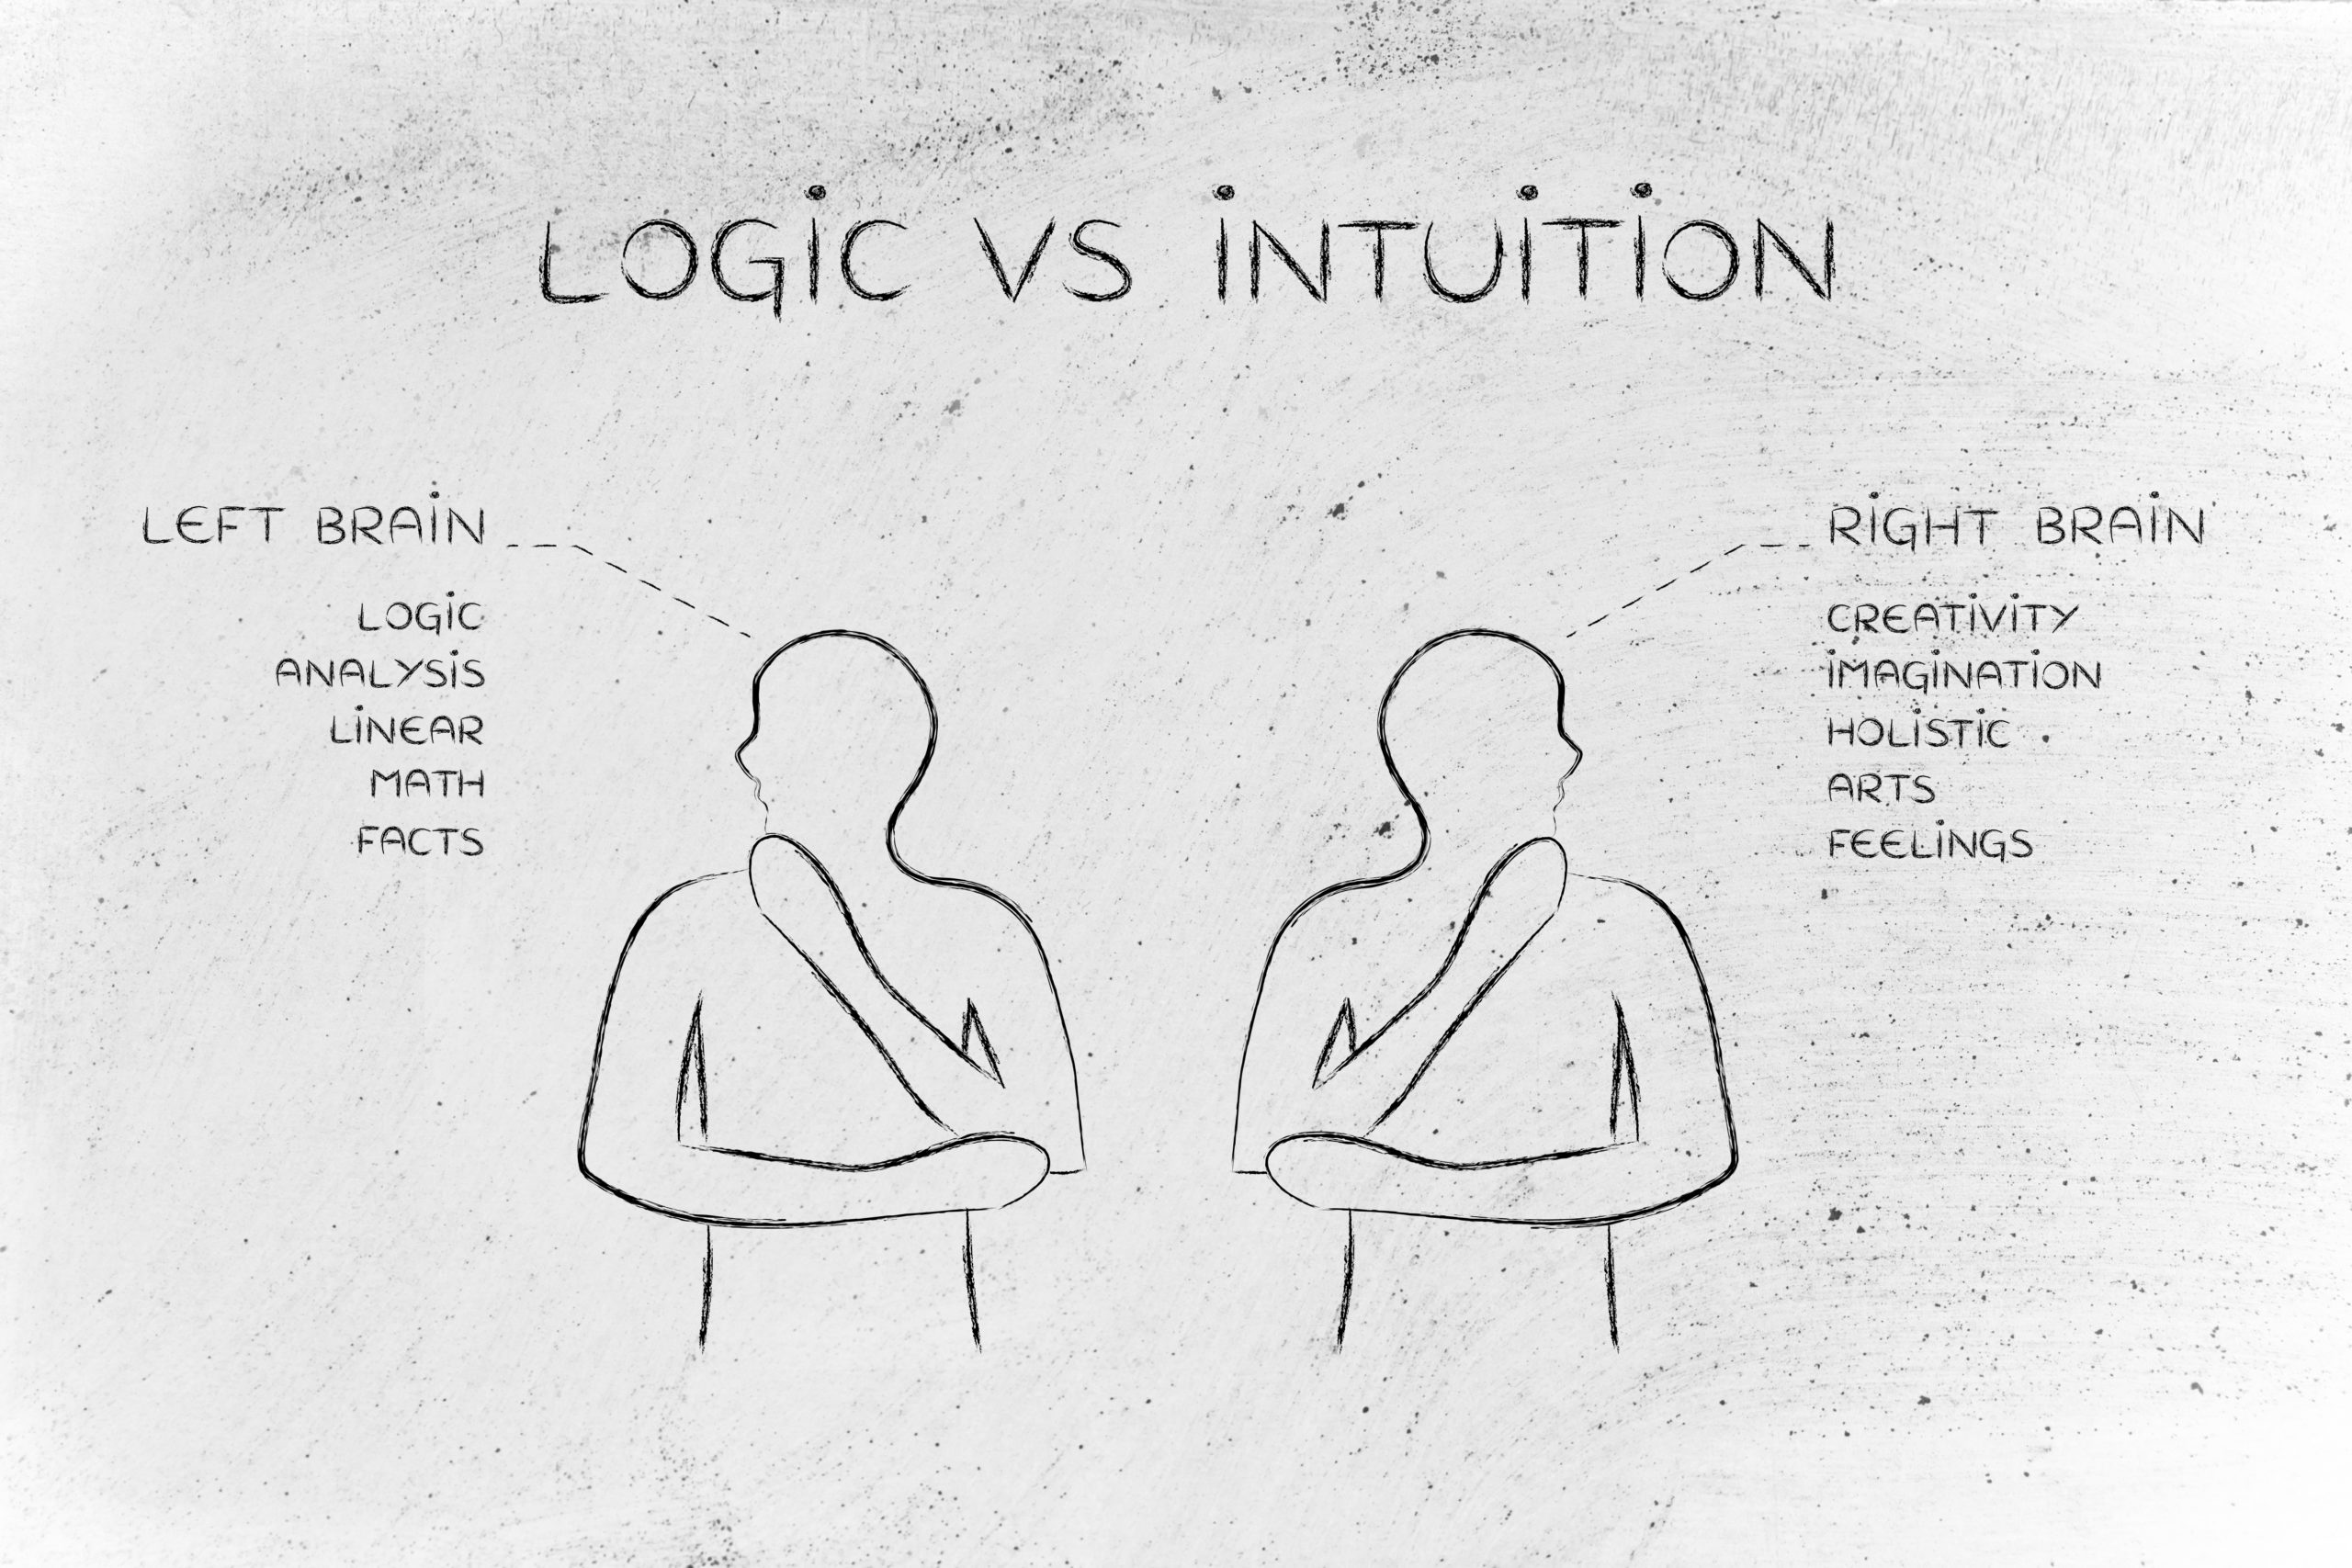 A picture of logic vs intuition